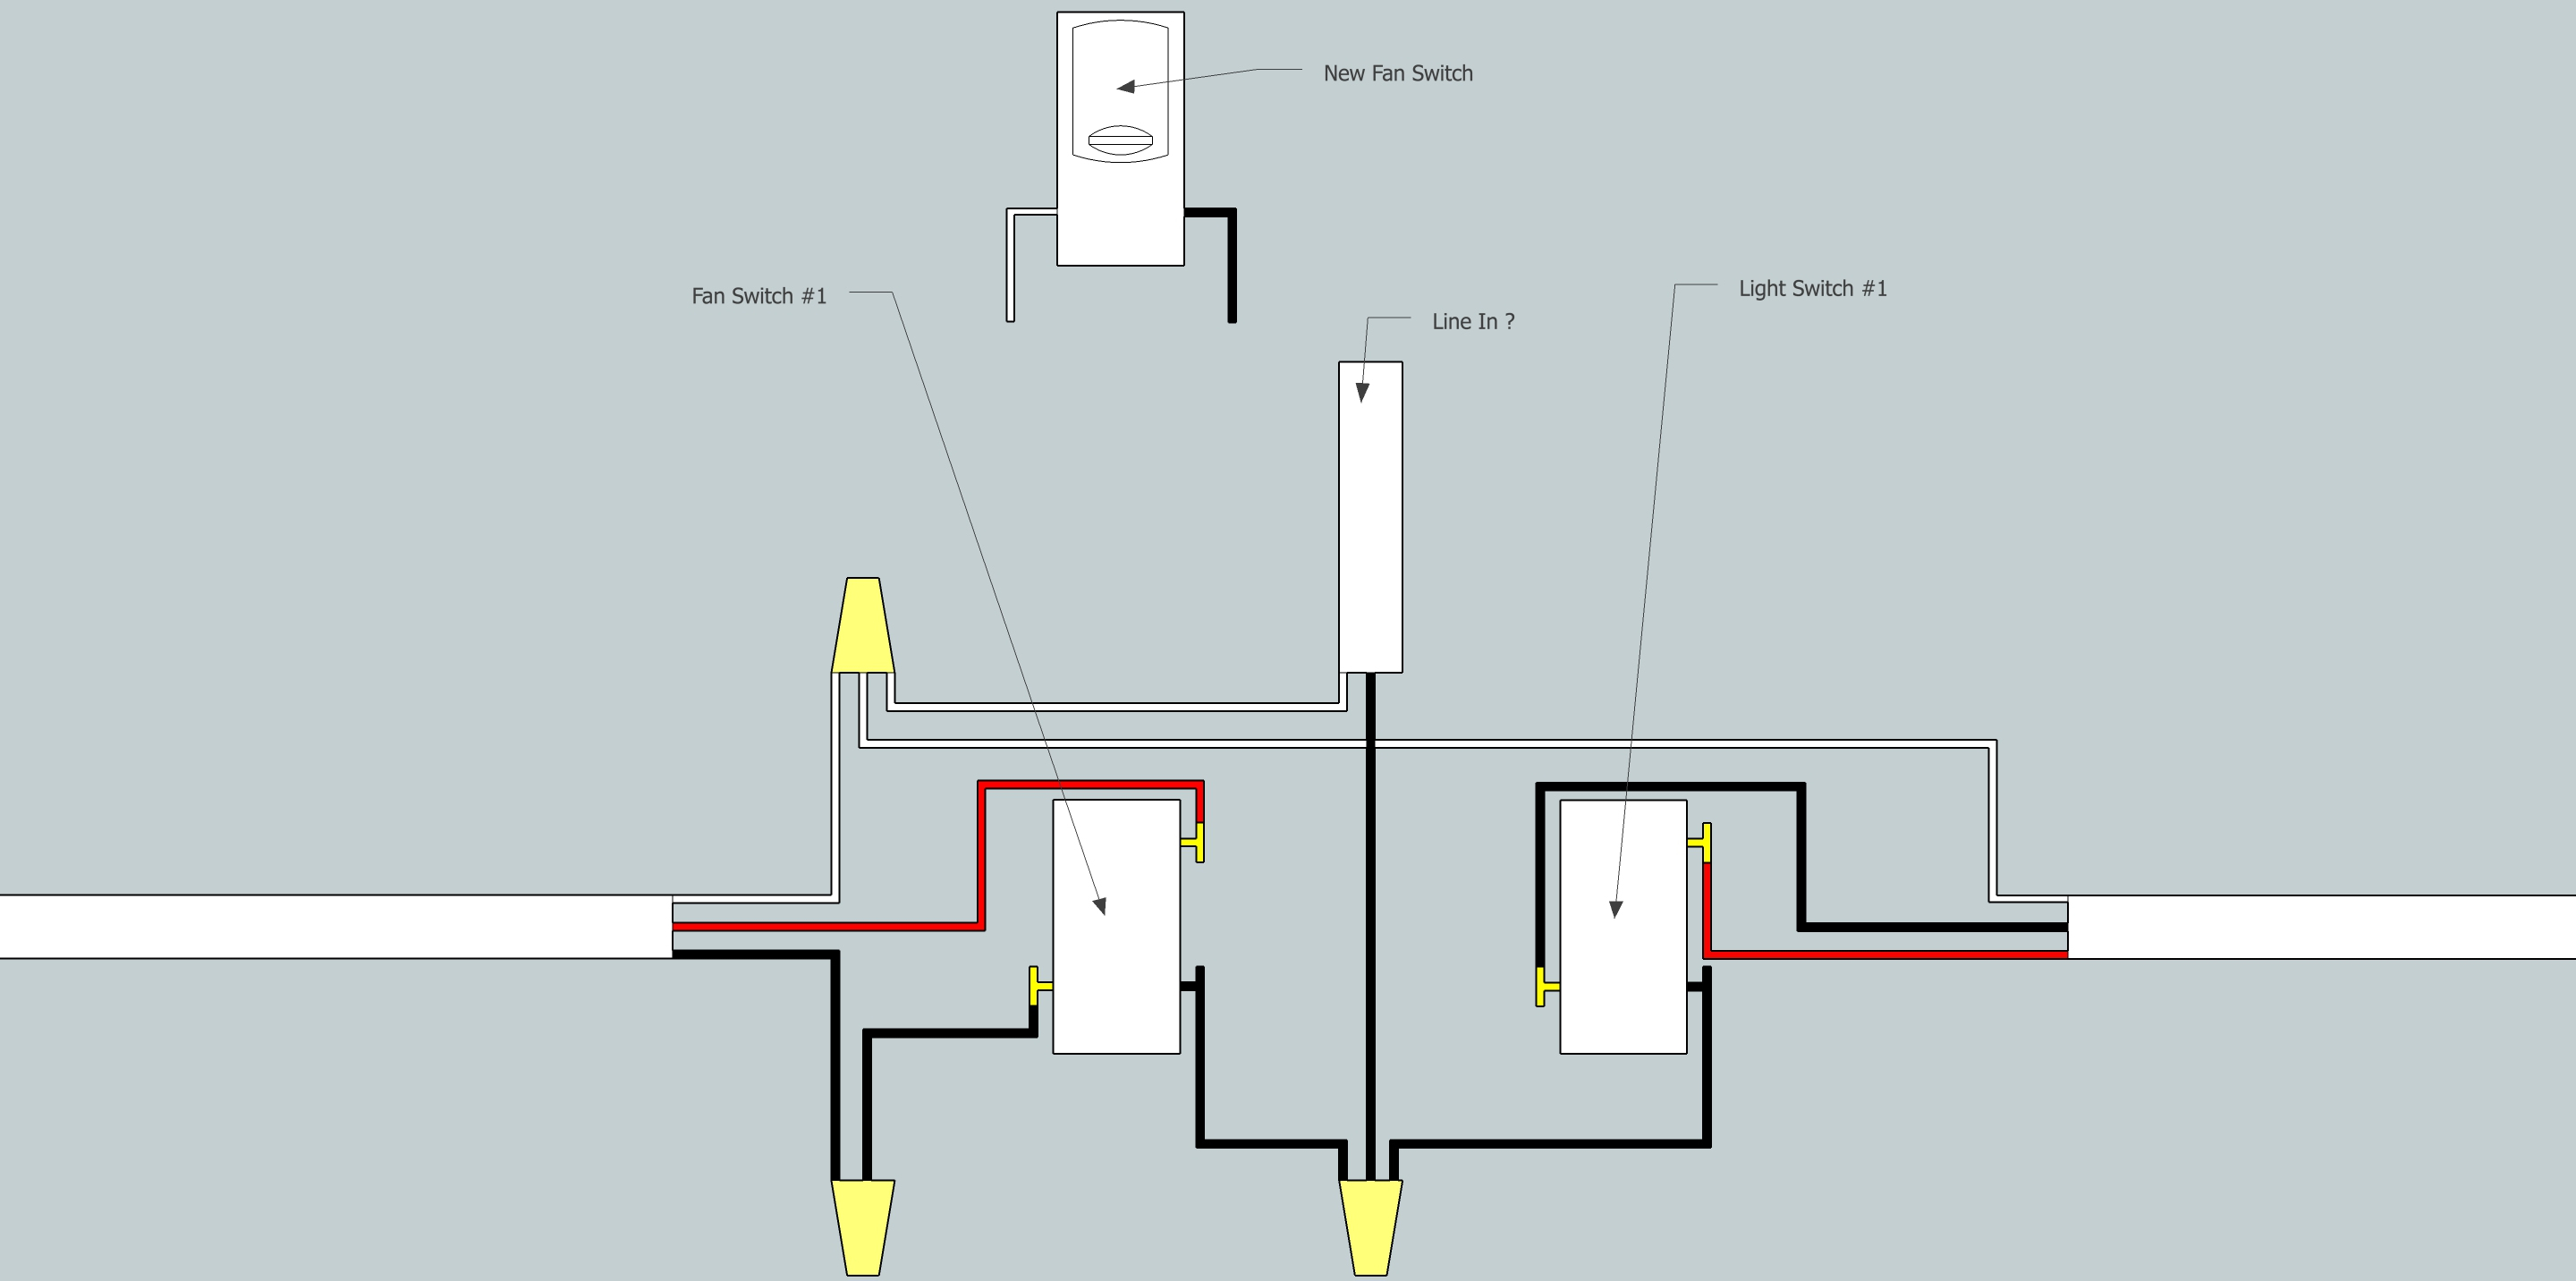 Electrical - Need Help Adding Fan To Existing 3-Way Switch Setup - Wiring Diagram 3 Way Switch